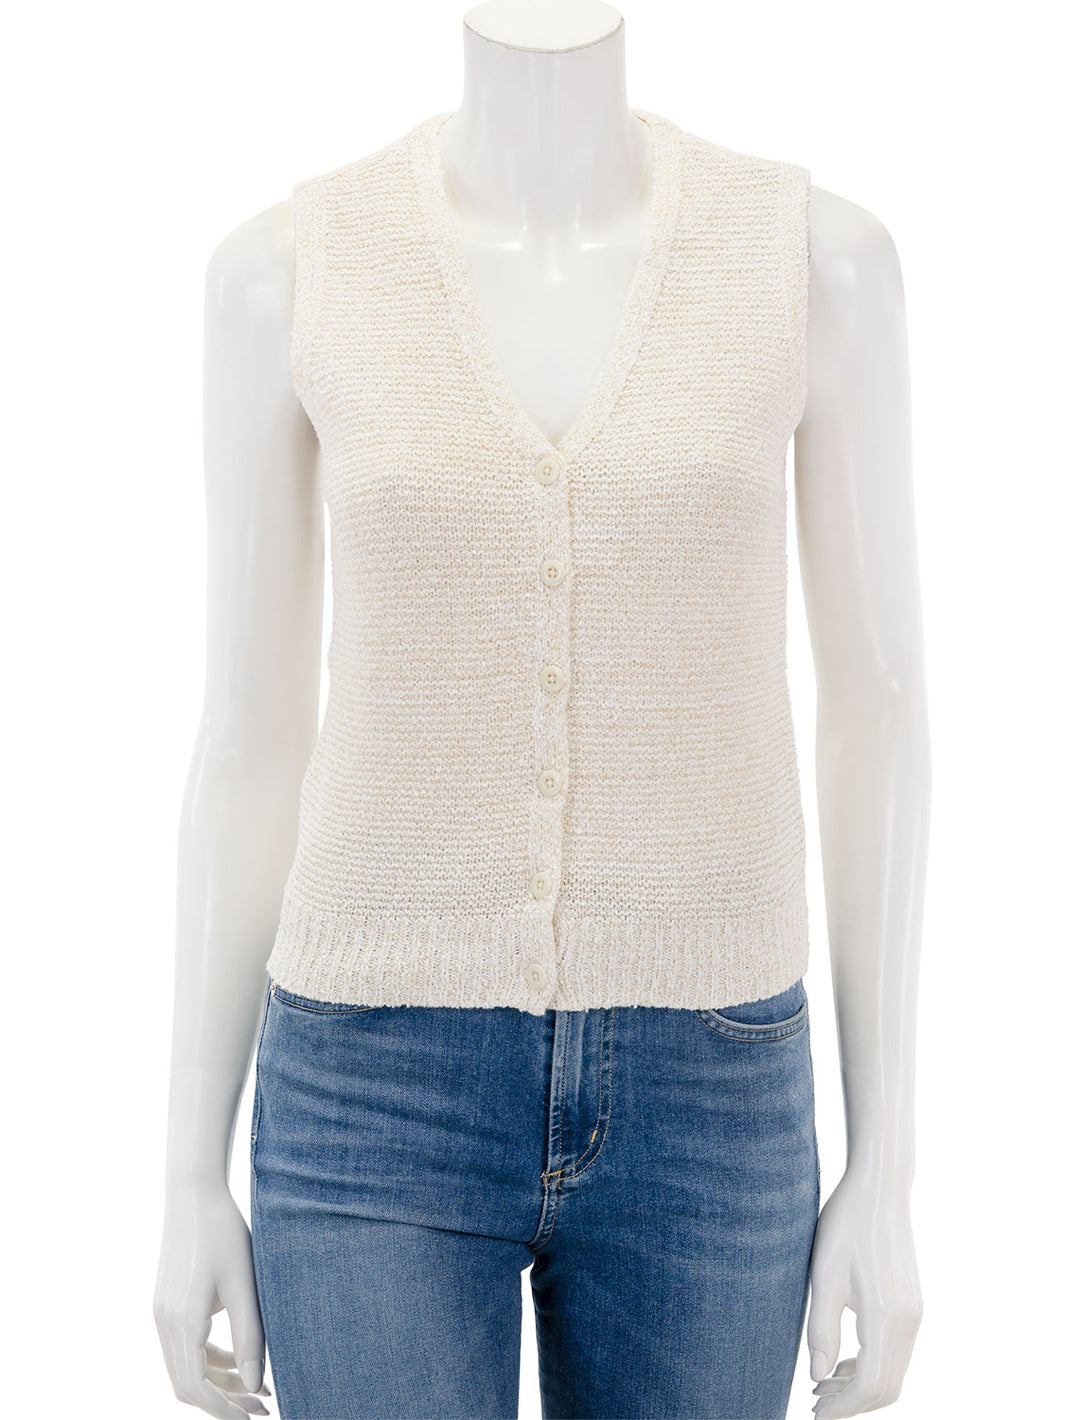 Front view of Rag & Bone's jackie sweater vest in ivory.